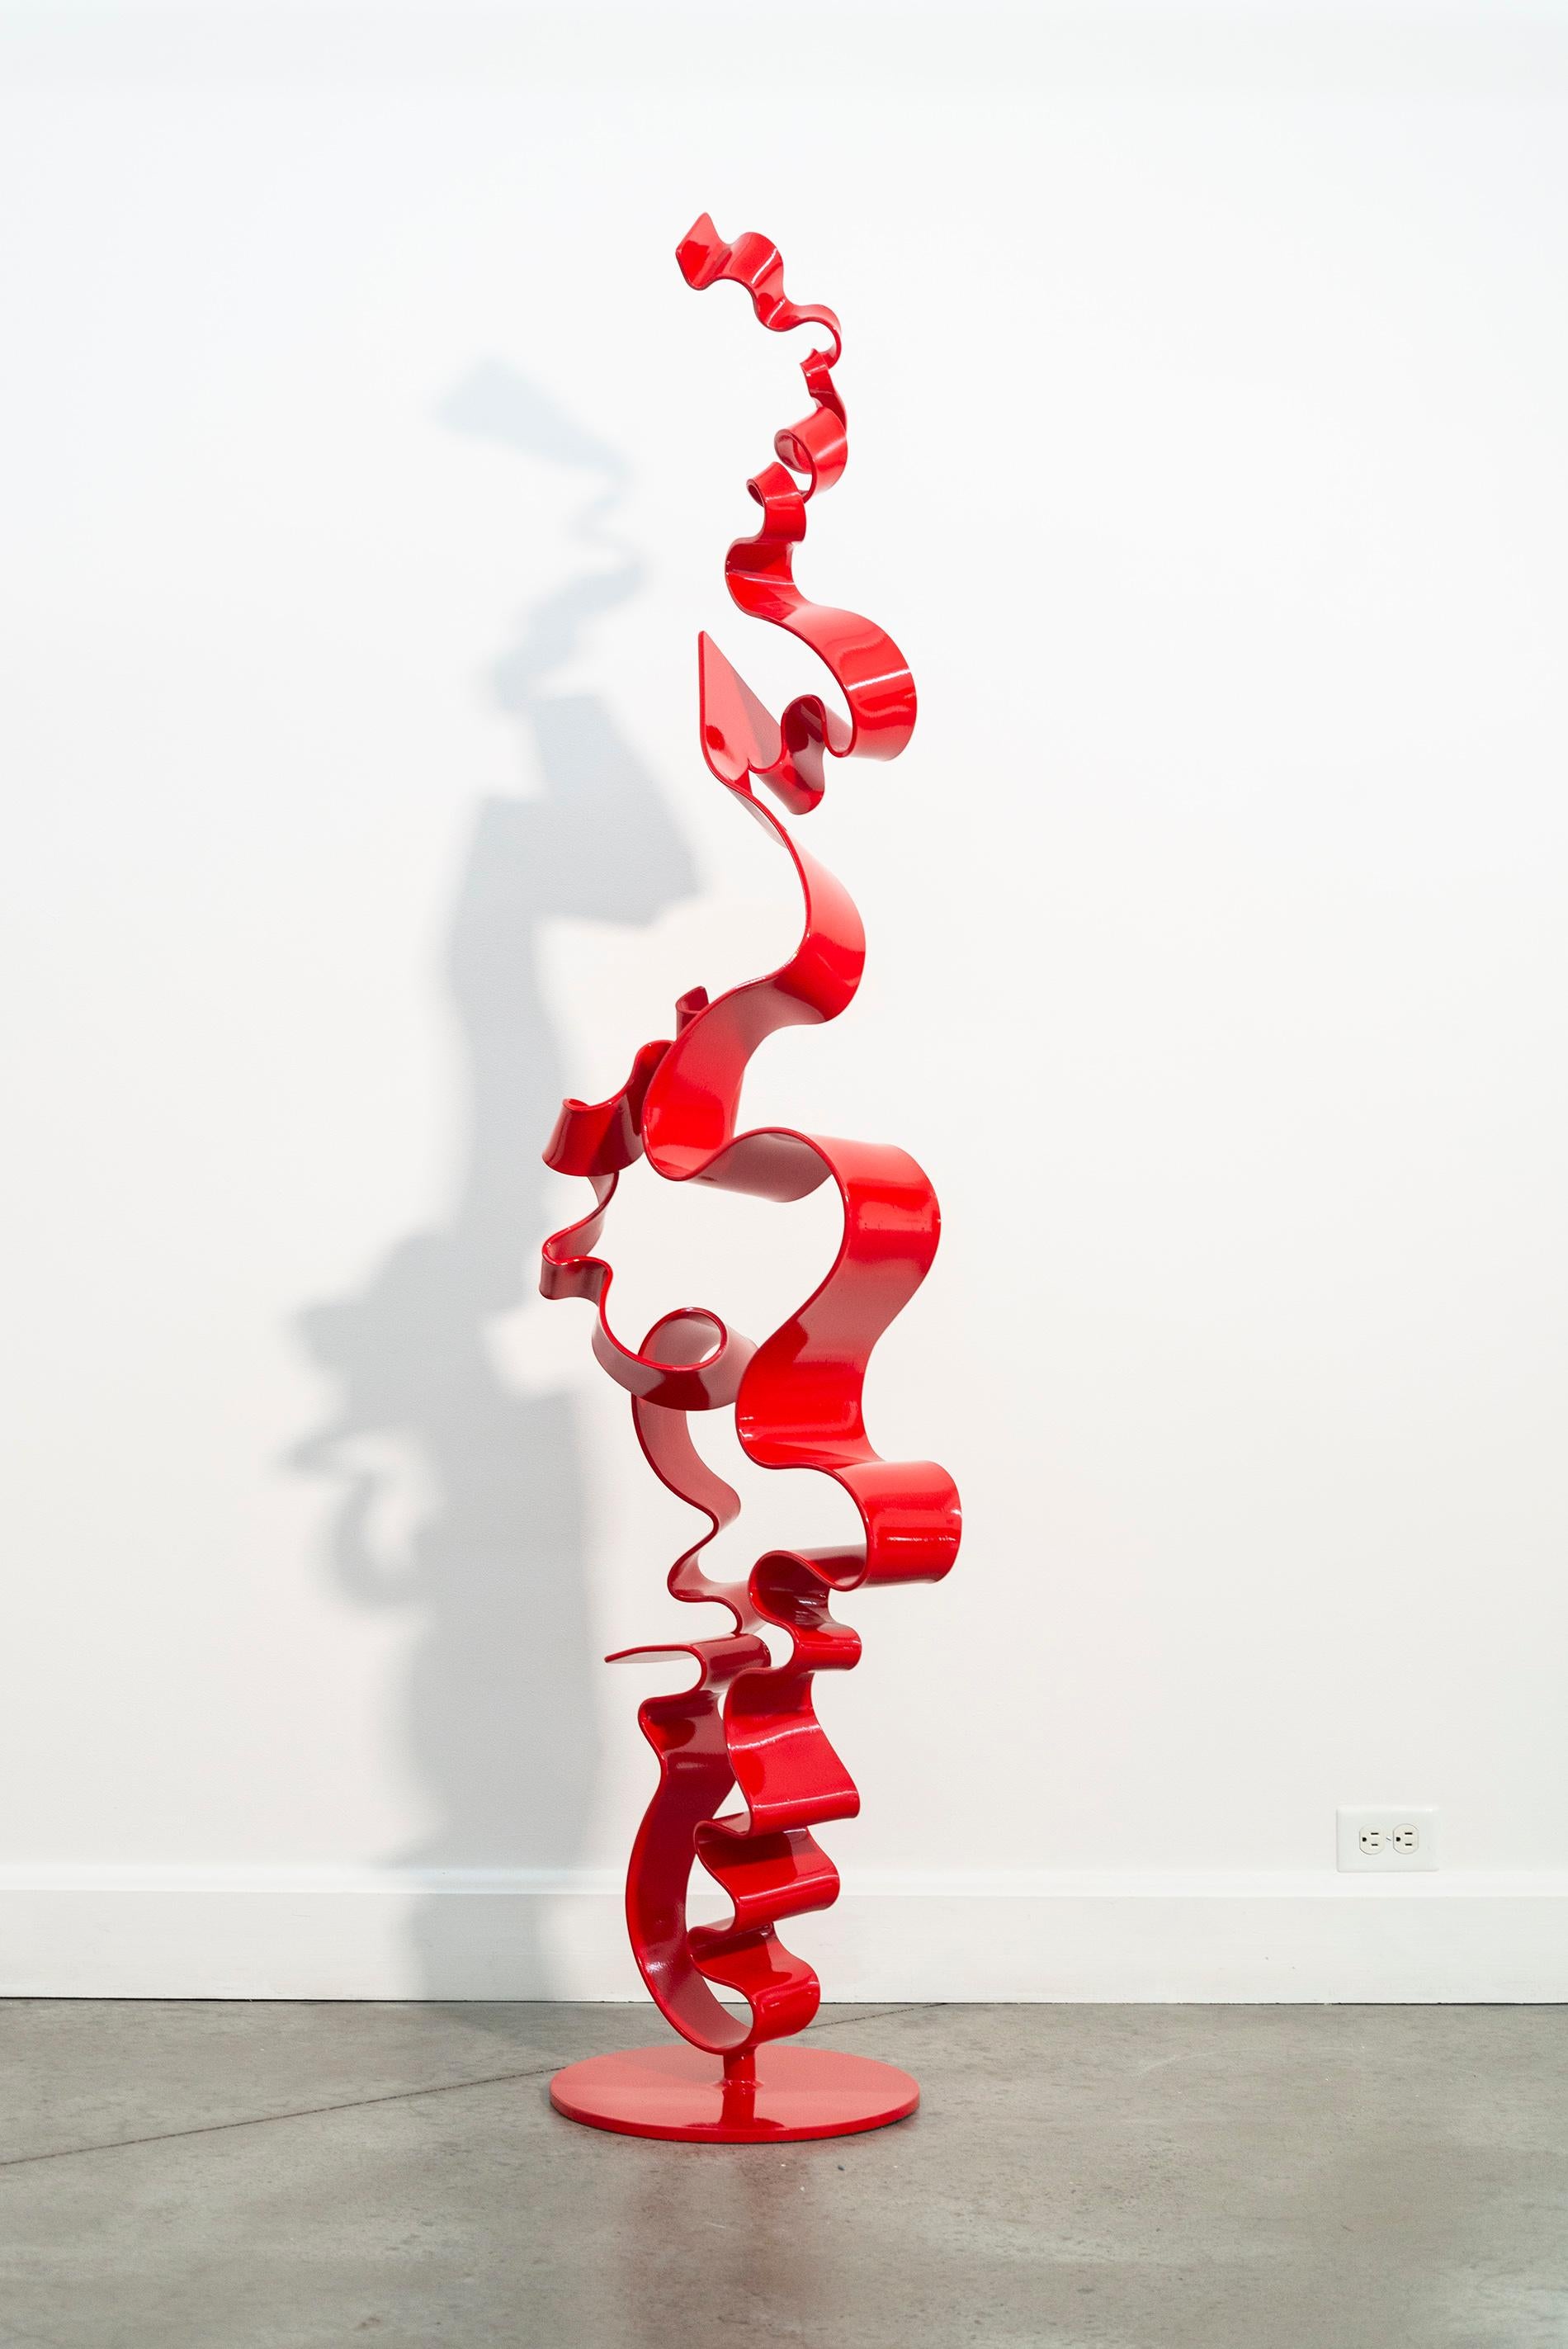 The elegant abstract sculptures of Stefan Duerst are characterized by clean, flowing lines and minimal form hand forged from steel. This piece is a single ‘ribbon’—a contemporary tower of steel that curls and twists skyward. It’s coated in a glossy